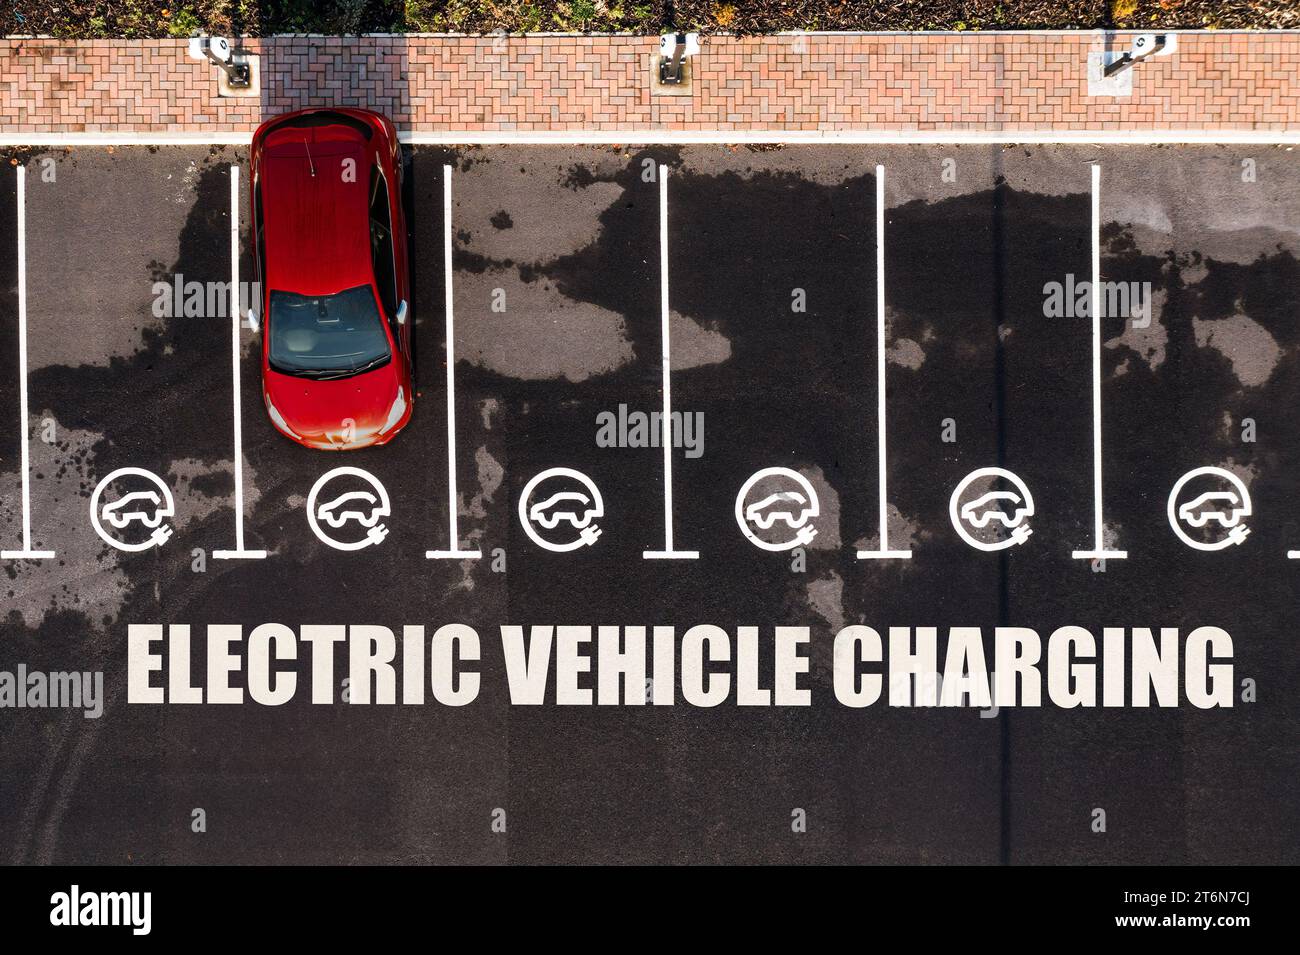 Aerial view directly above an electric vehicle charging station with parking spaces and road markings denoting electric car charging bays Stock Photo